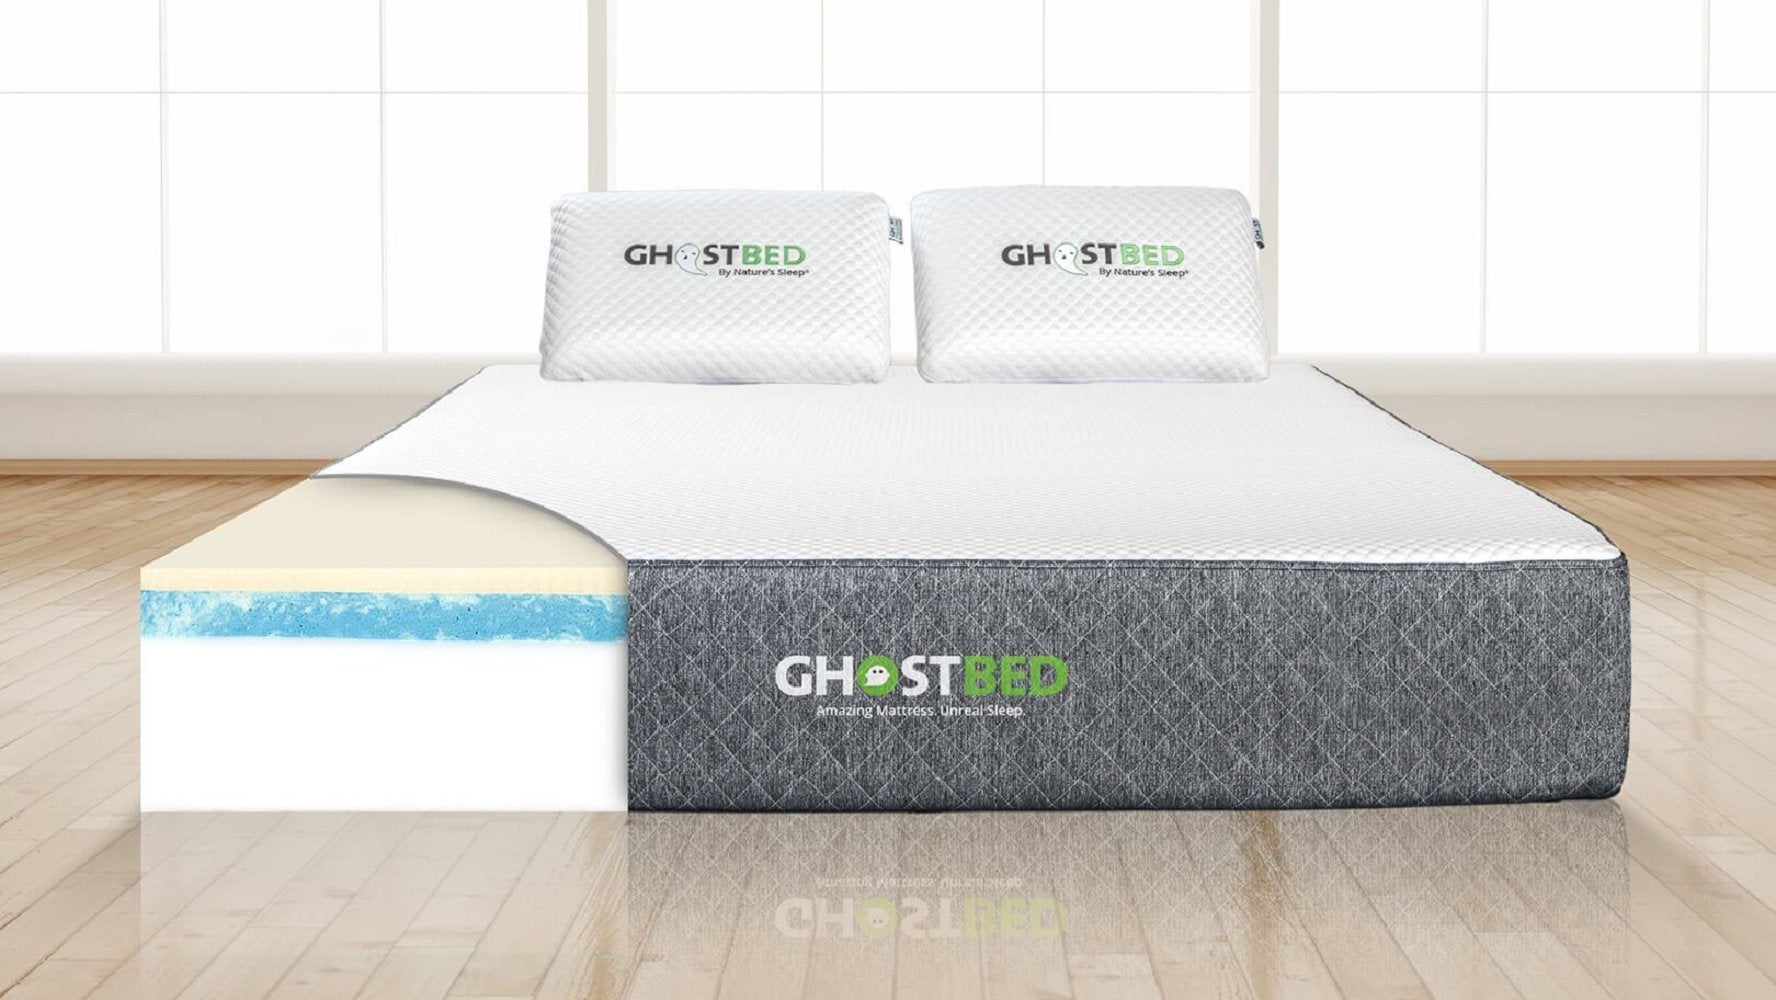 ghostbed classic memory foam mattress stores